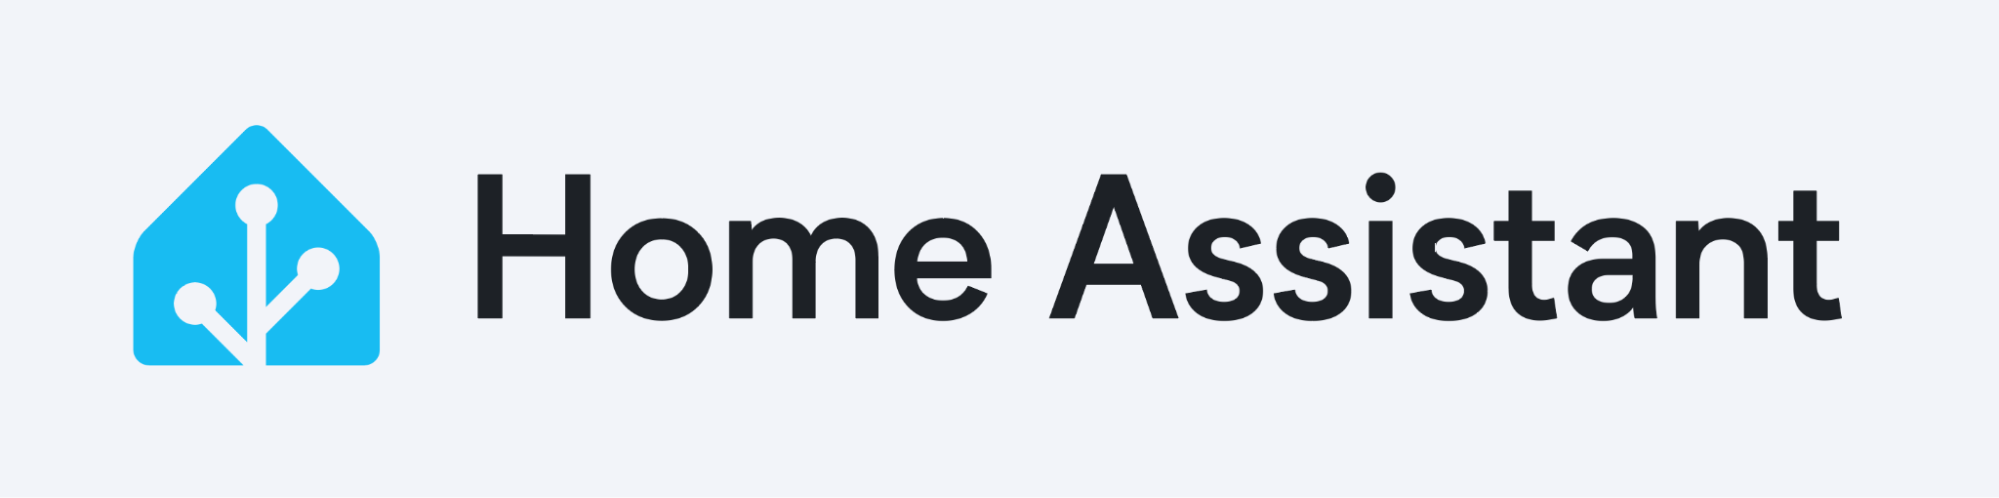 The new Home Assistant logo on a gray background.